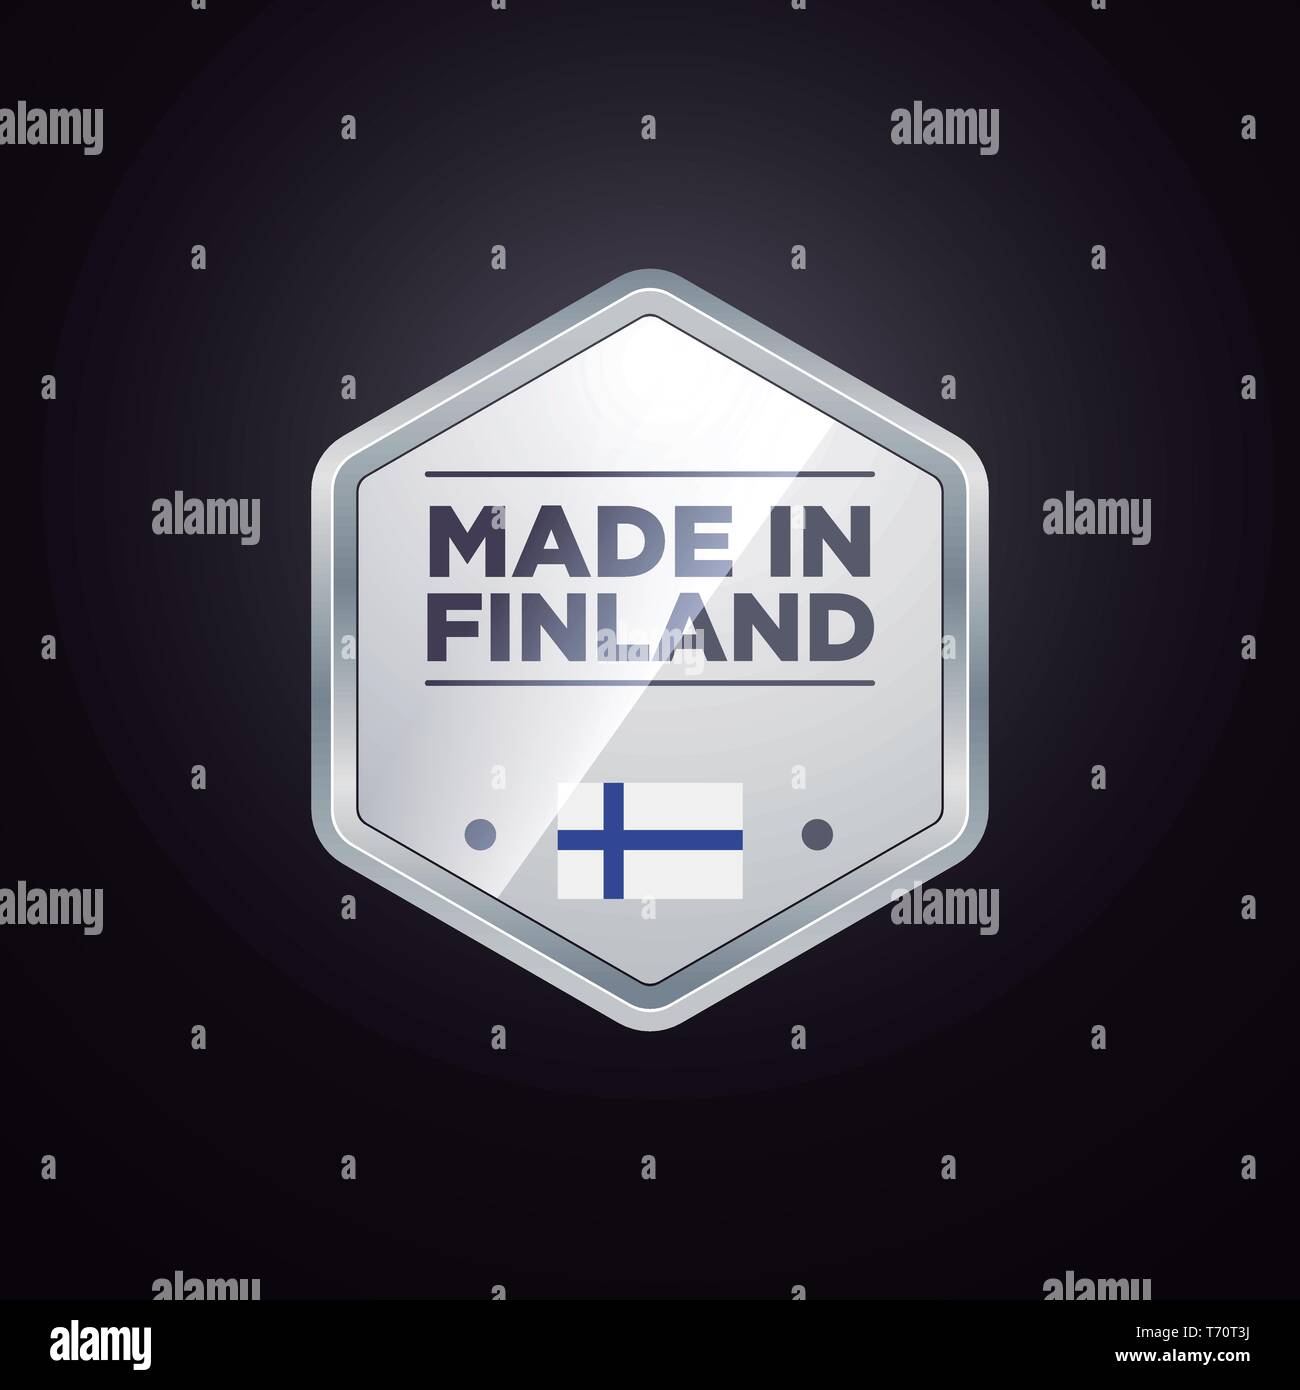 MADE IN FINLAND Stock Vector